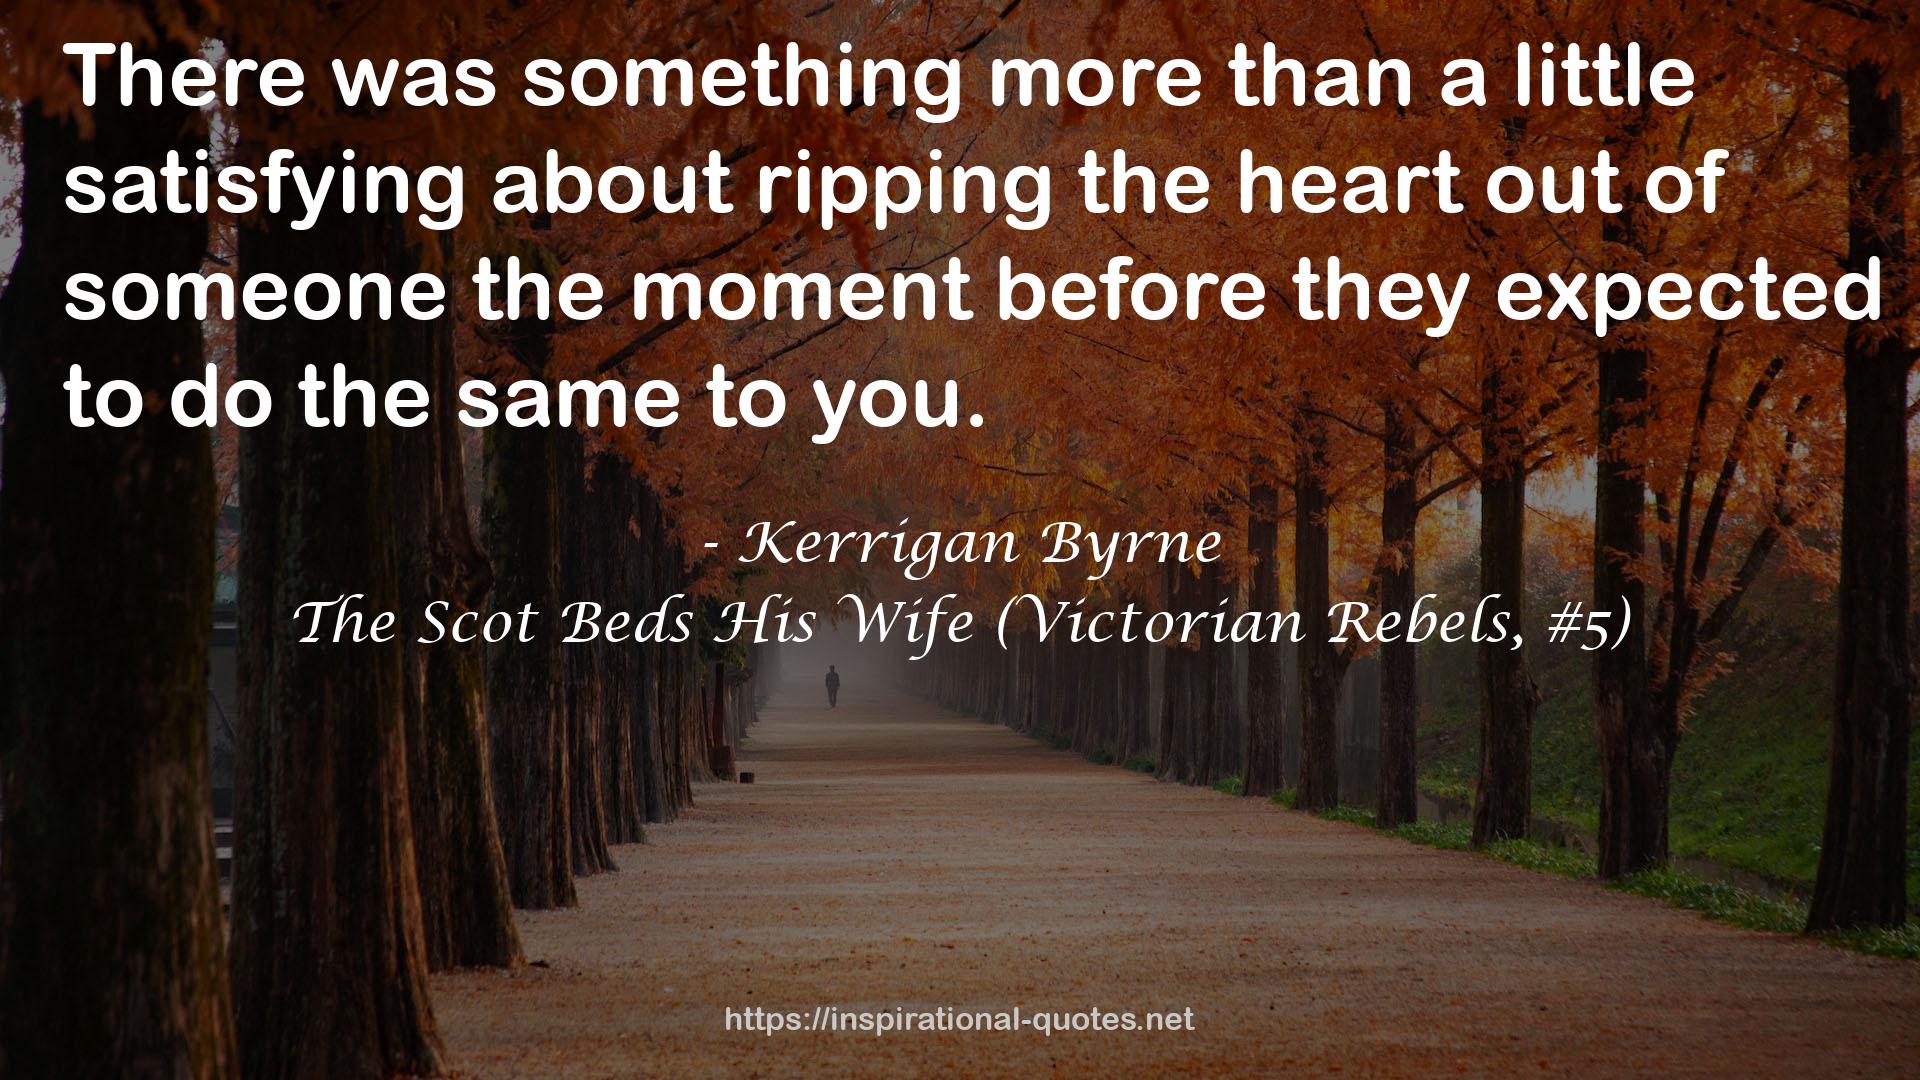 The Scot Beds His Wife (Victorian Rebels, #5) QUOTES